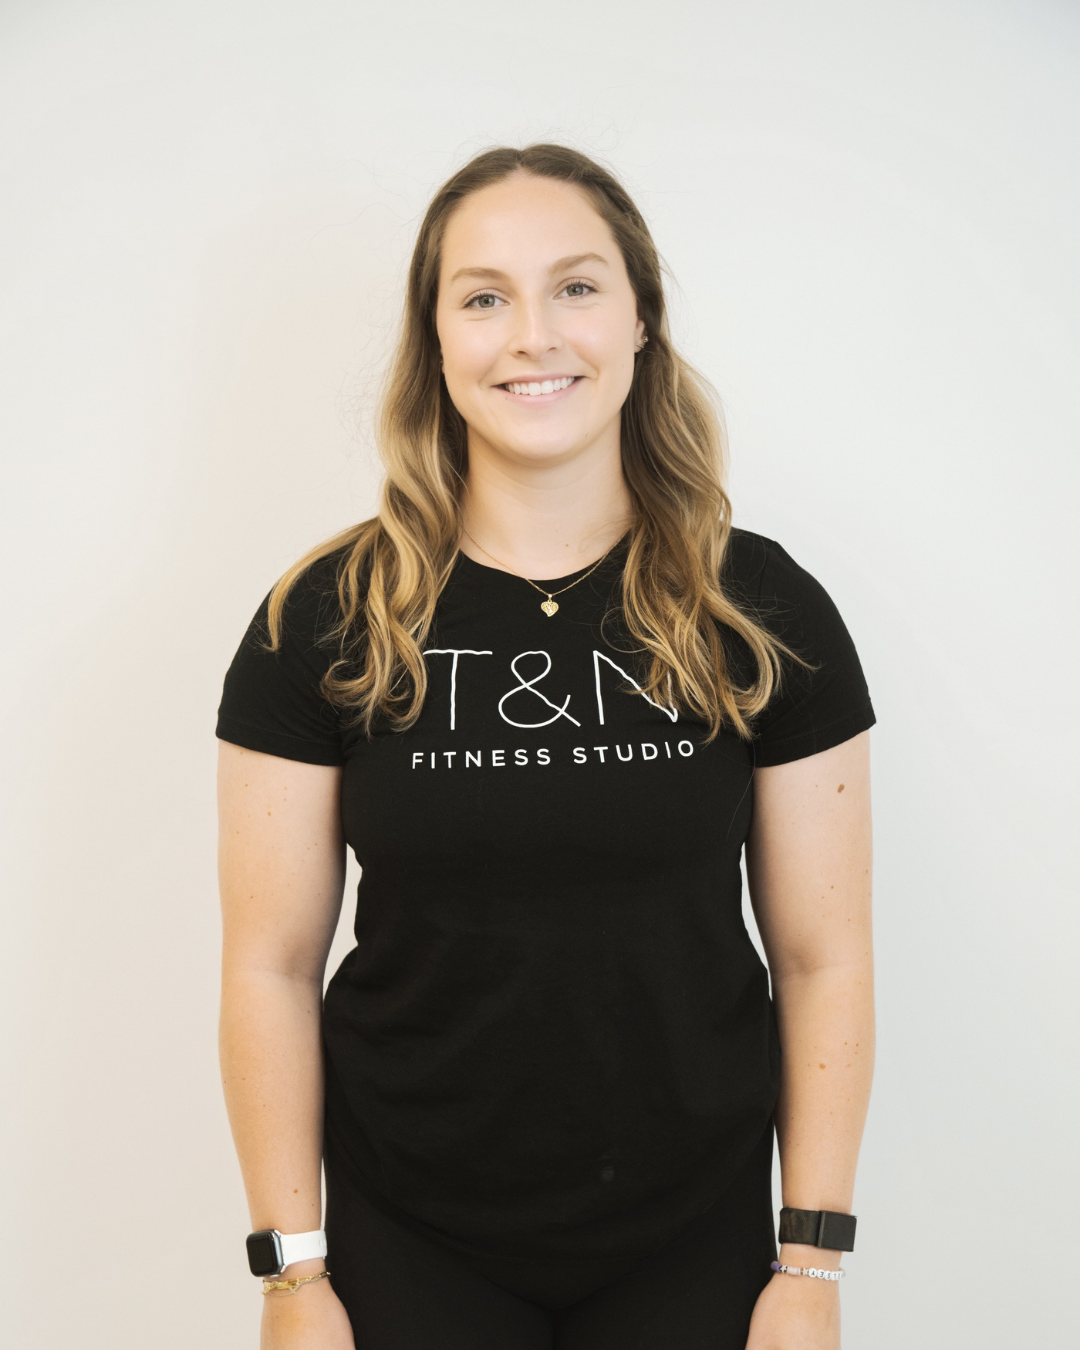 A woman wearing a black t-shirt stands confidently in front of a white wall, embodying the essence of team spirit and showcasing her expertise in SEO keywords.